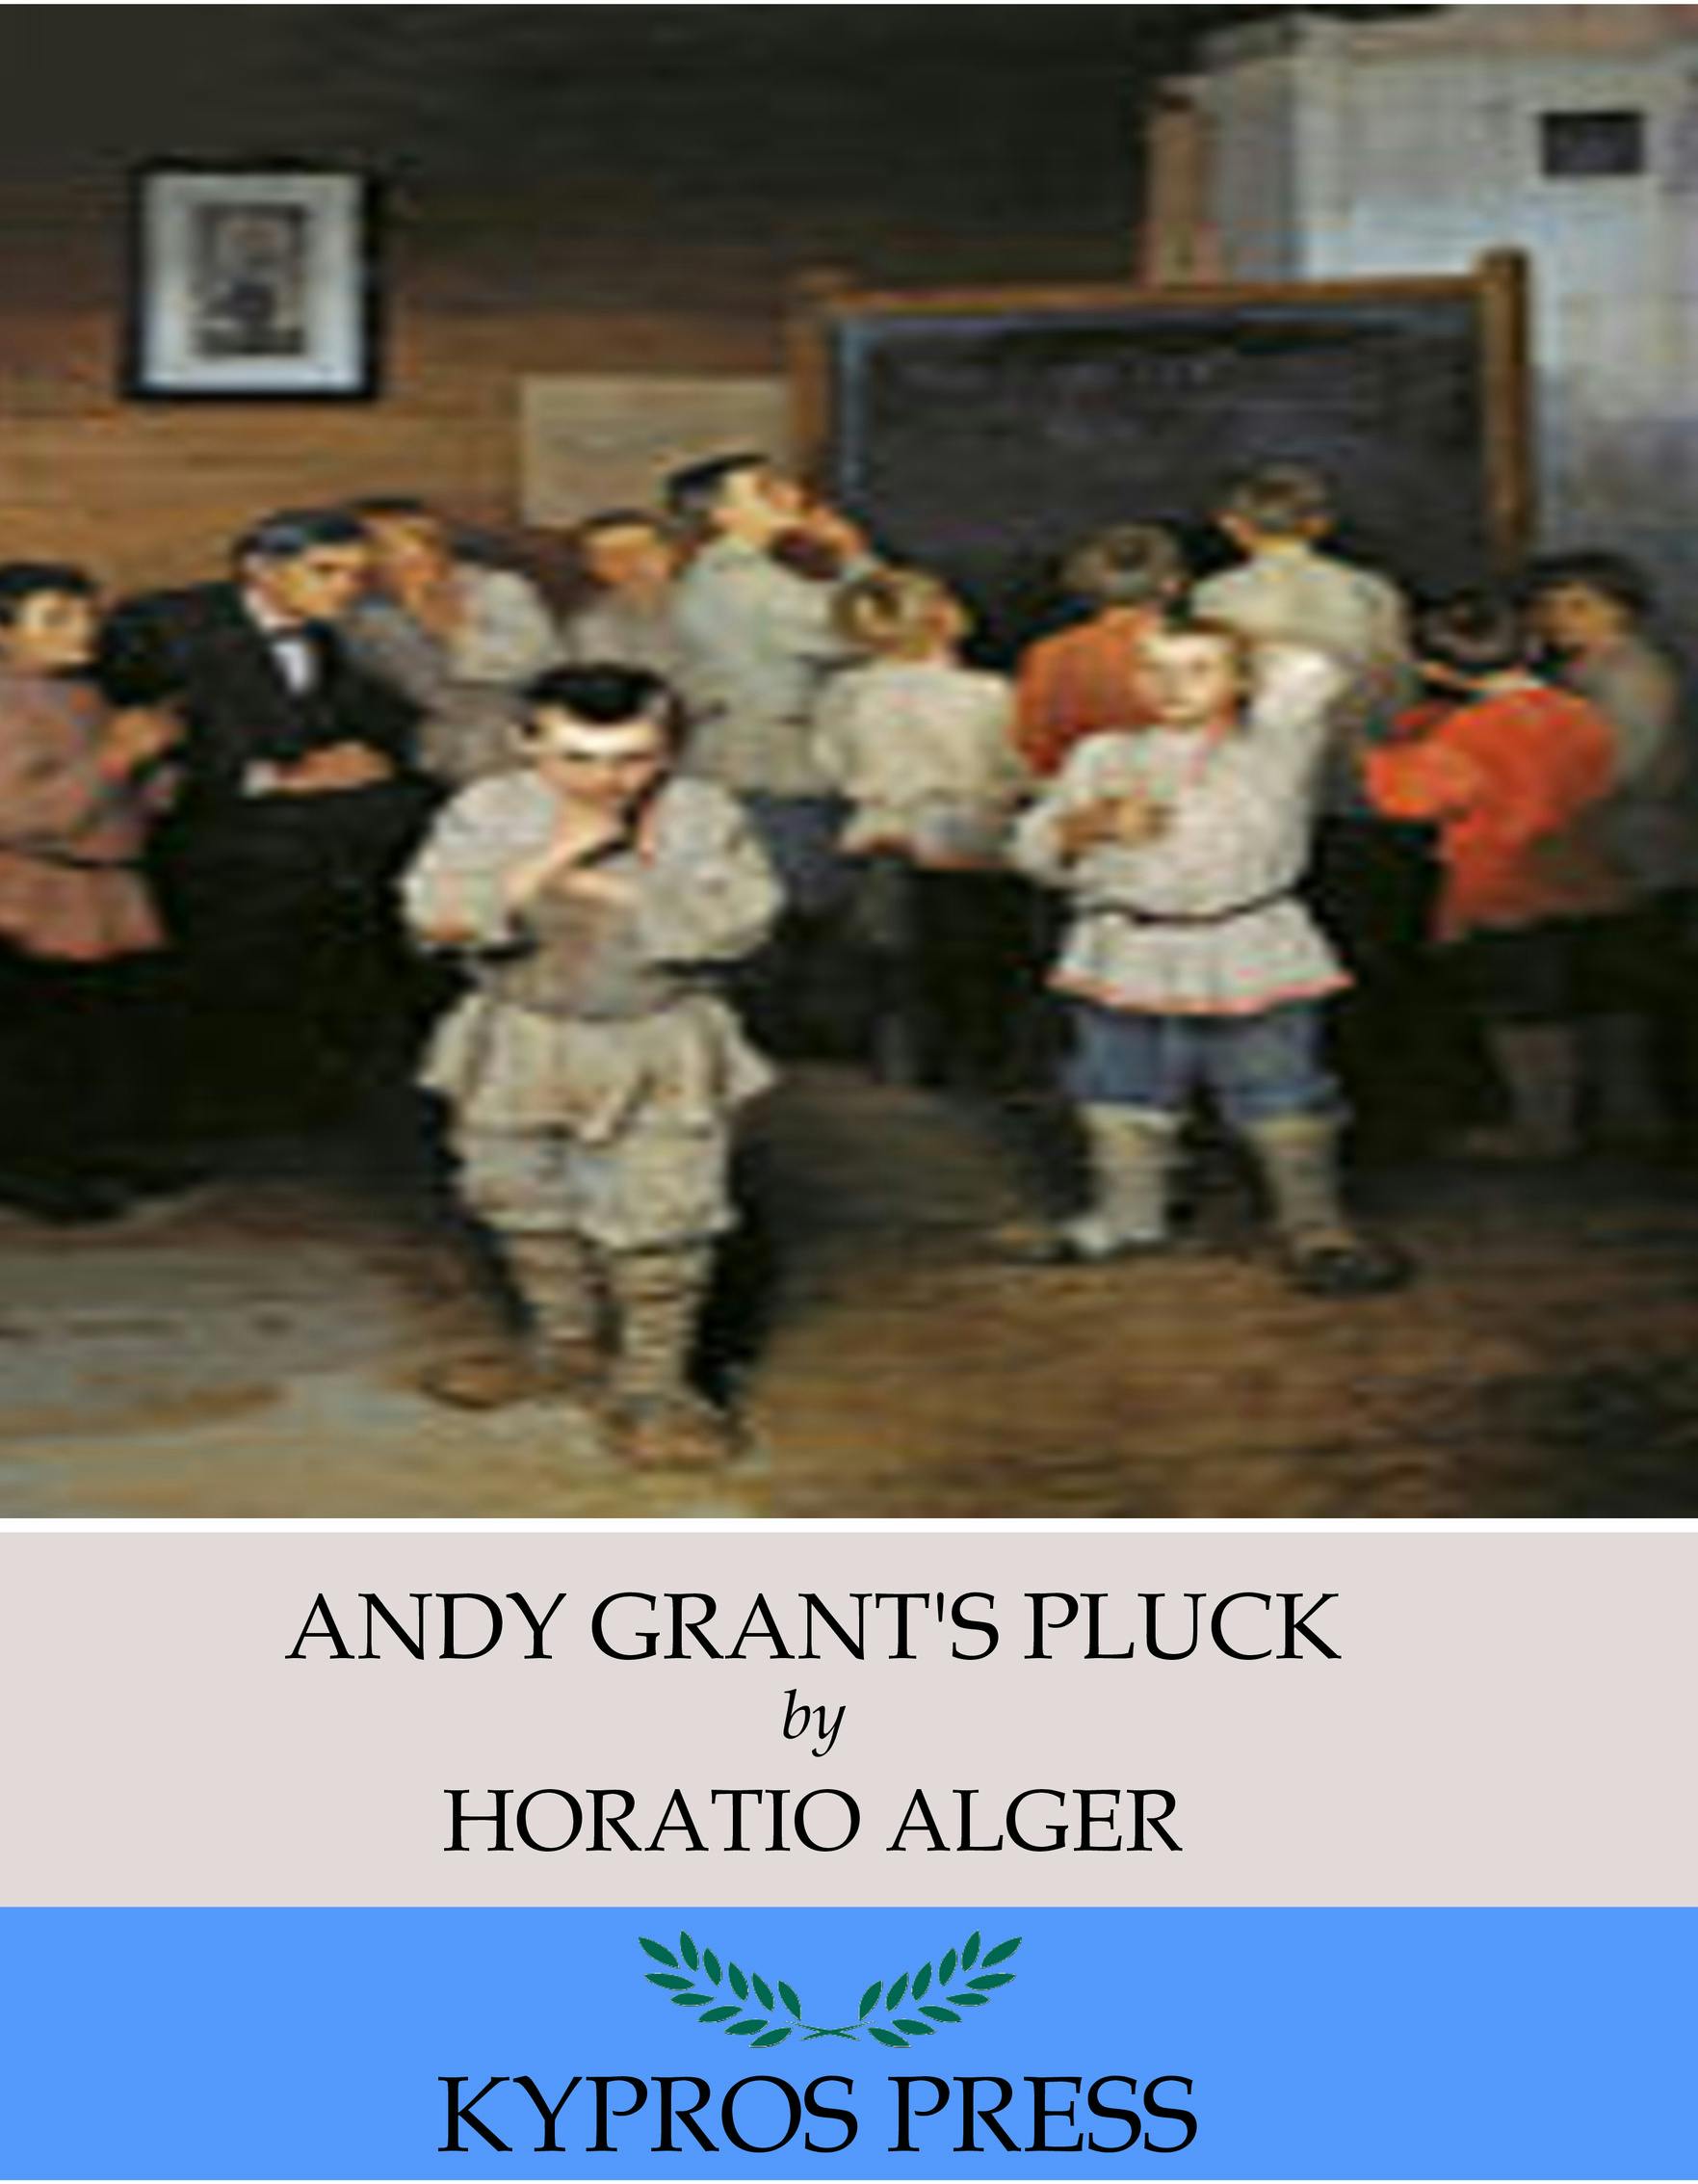 Andy Grant’s Pluck - Horatio Alger